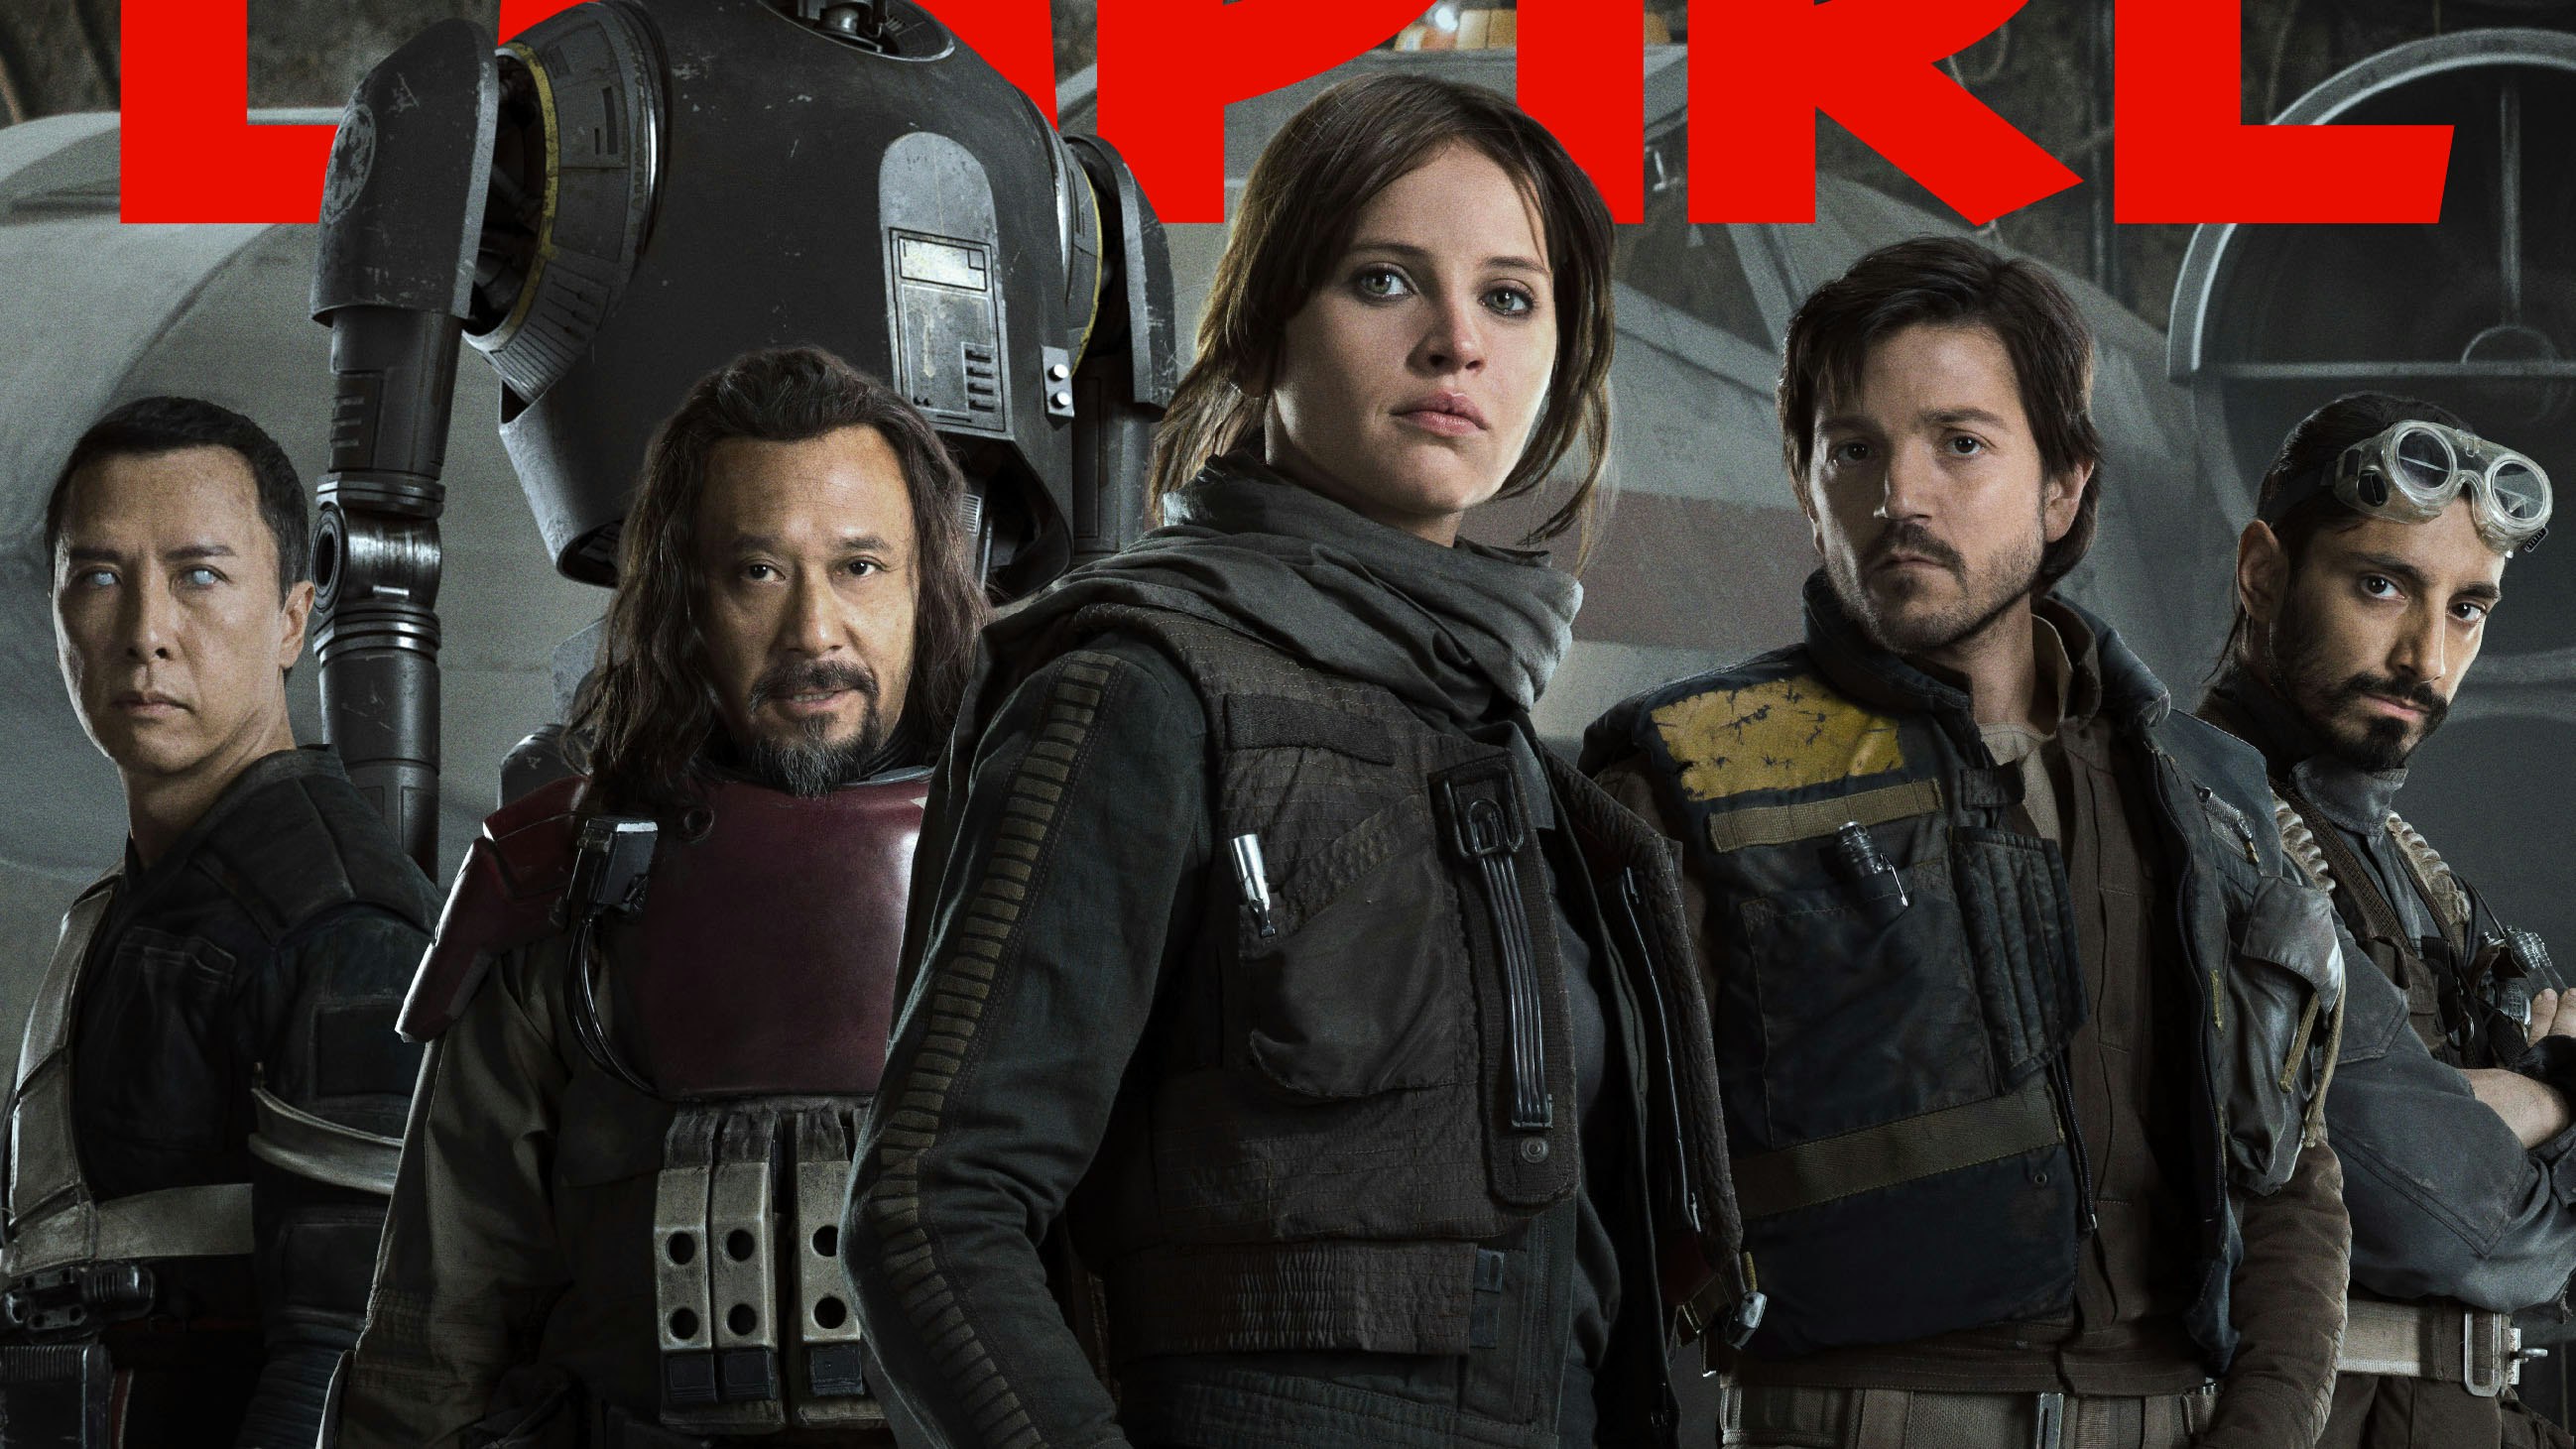 Empire's first cover for Rogue One: A Star Wars Story revealed, Movies